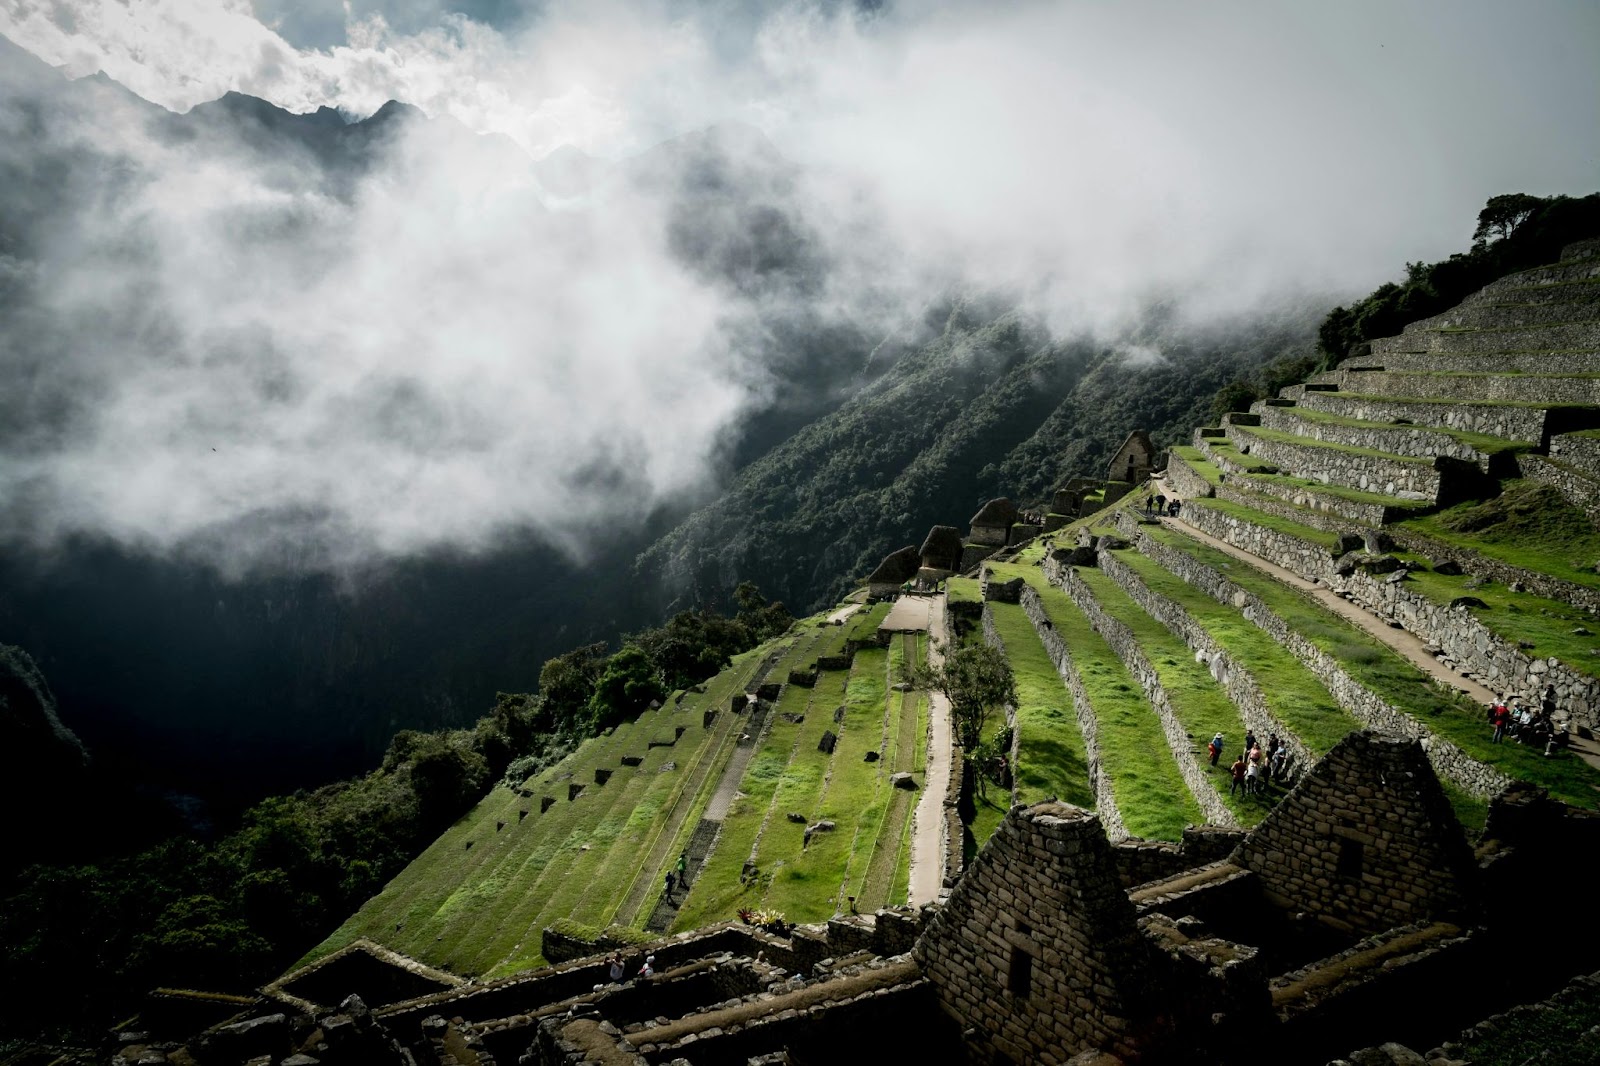 Many hikers enjoy visiting Machu Picchu in the springtime. 
pictured: the steps of Machu Picchu